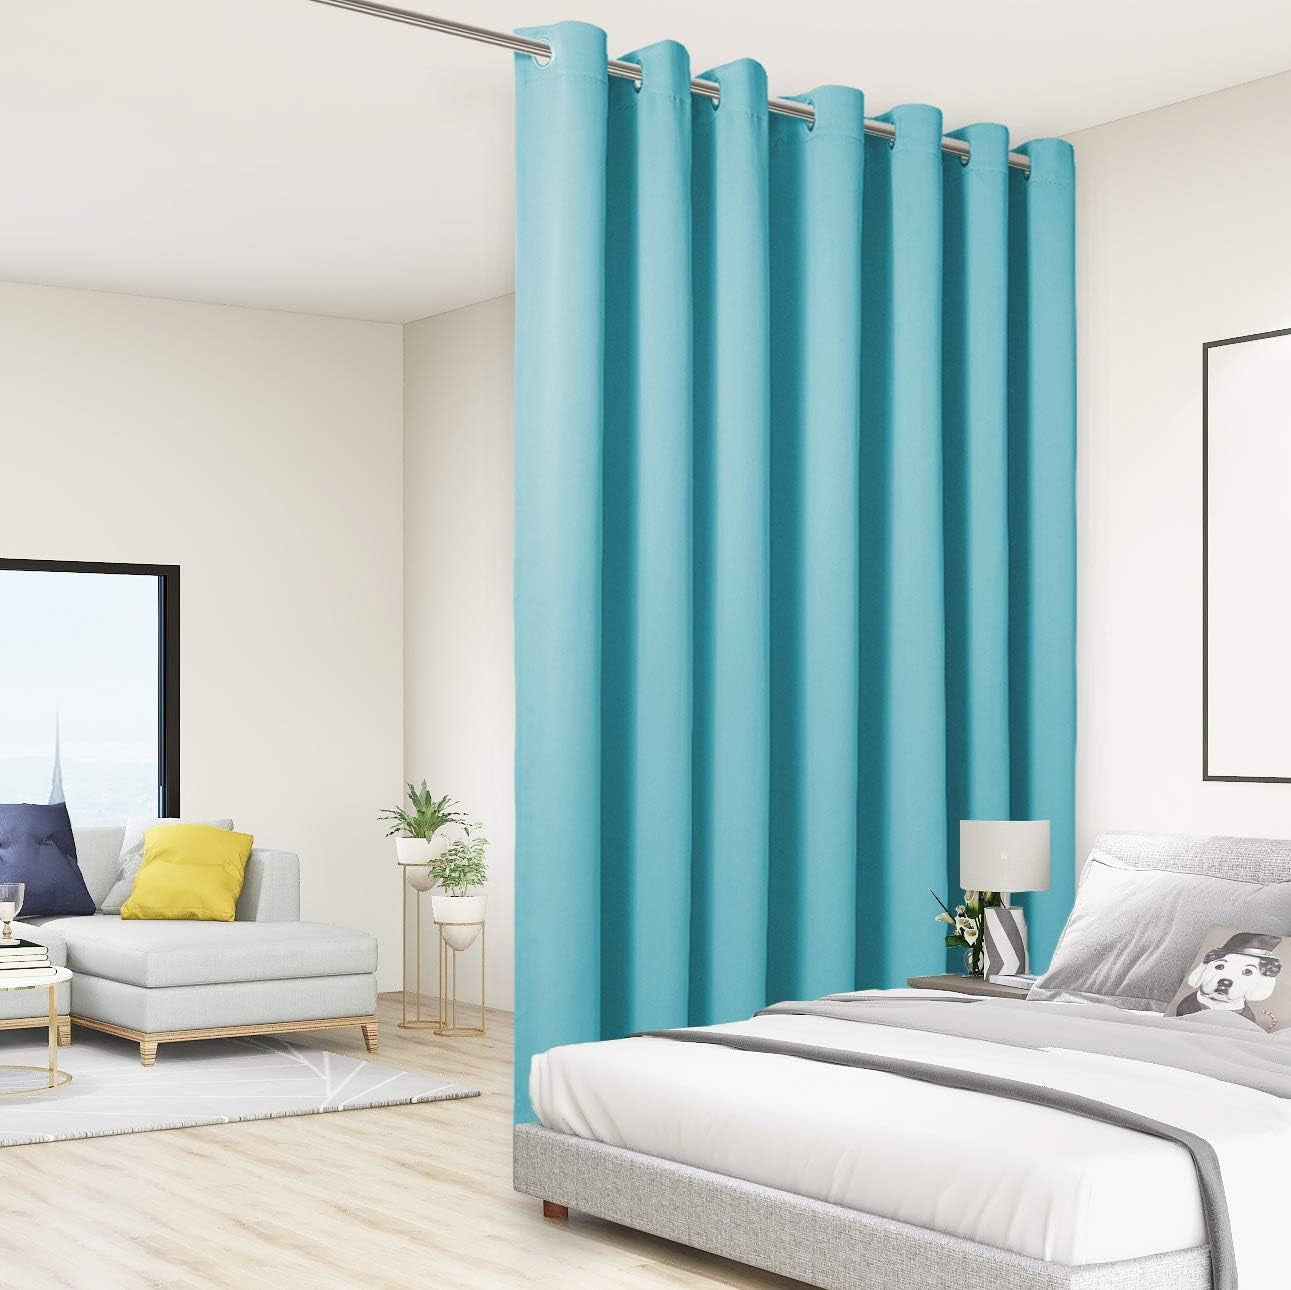 BONZER Room Divider Curtain Total Privacy Wall Grommet Thermal Insulated Soundproof Extra Wide Blackout Curtains for Bedroom Living Room, 84L X 108W Inch (7L X 9W Ft), 1 Panel, Dark Grey  BONZER Teal 108.00" X 150.00" 